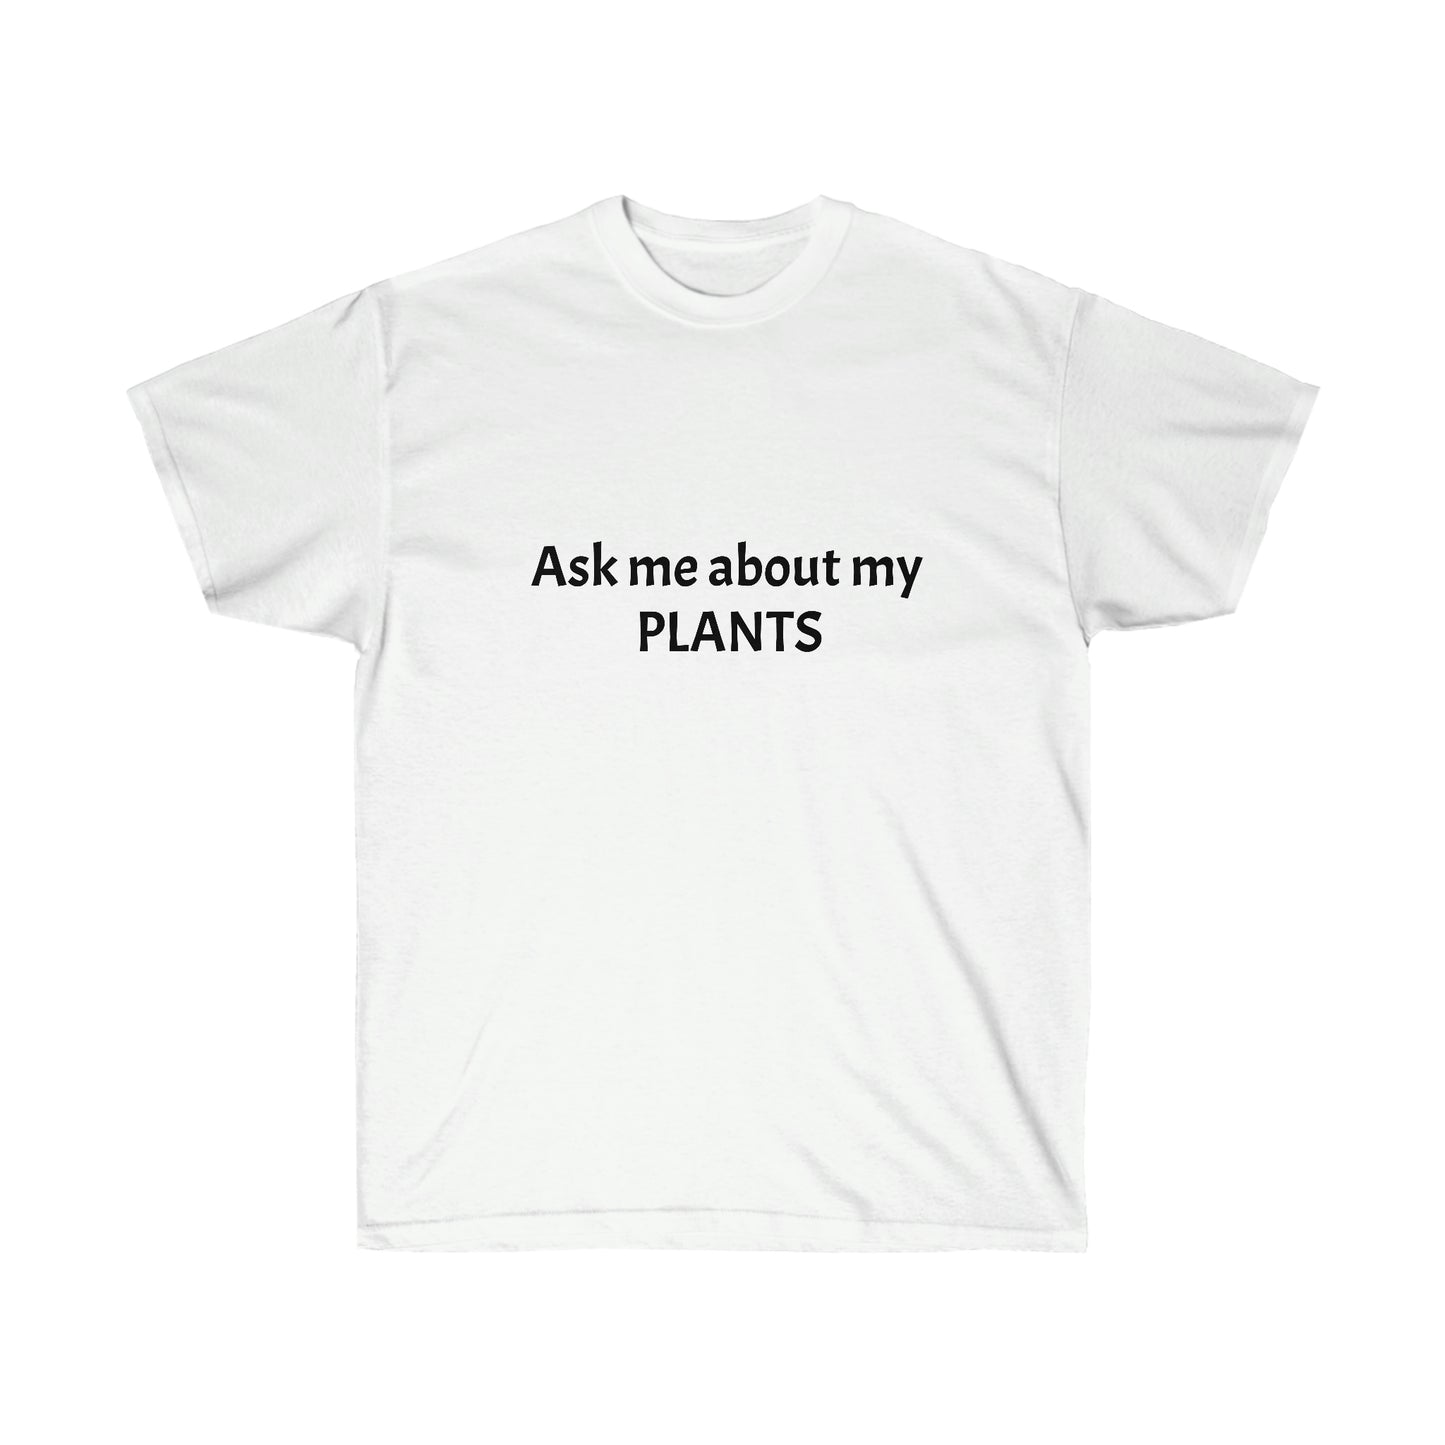 "Ask me about my PLANTS" Unisex Ultra Cotton Tee